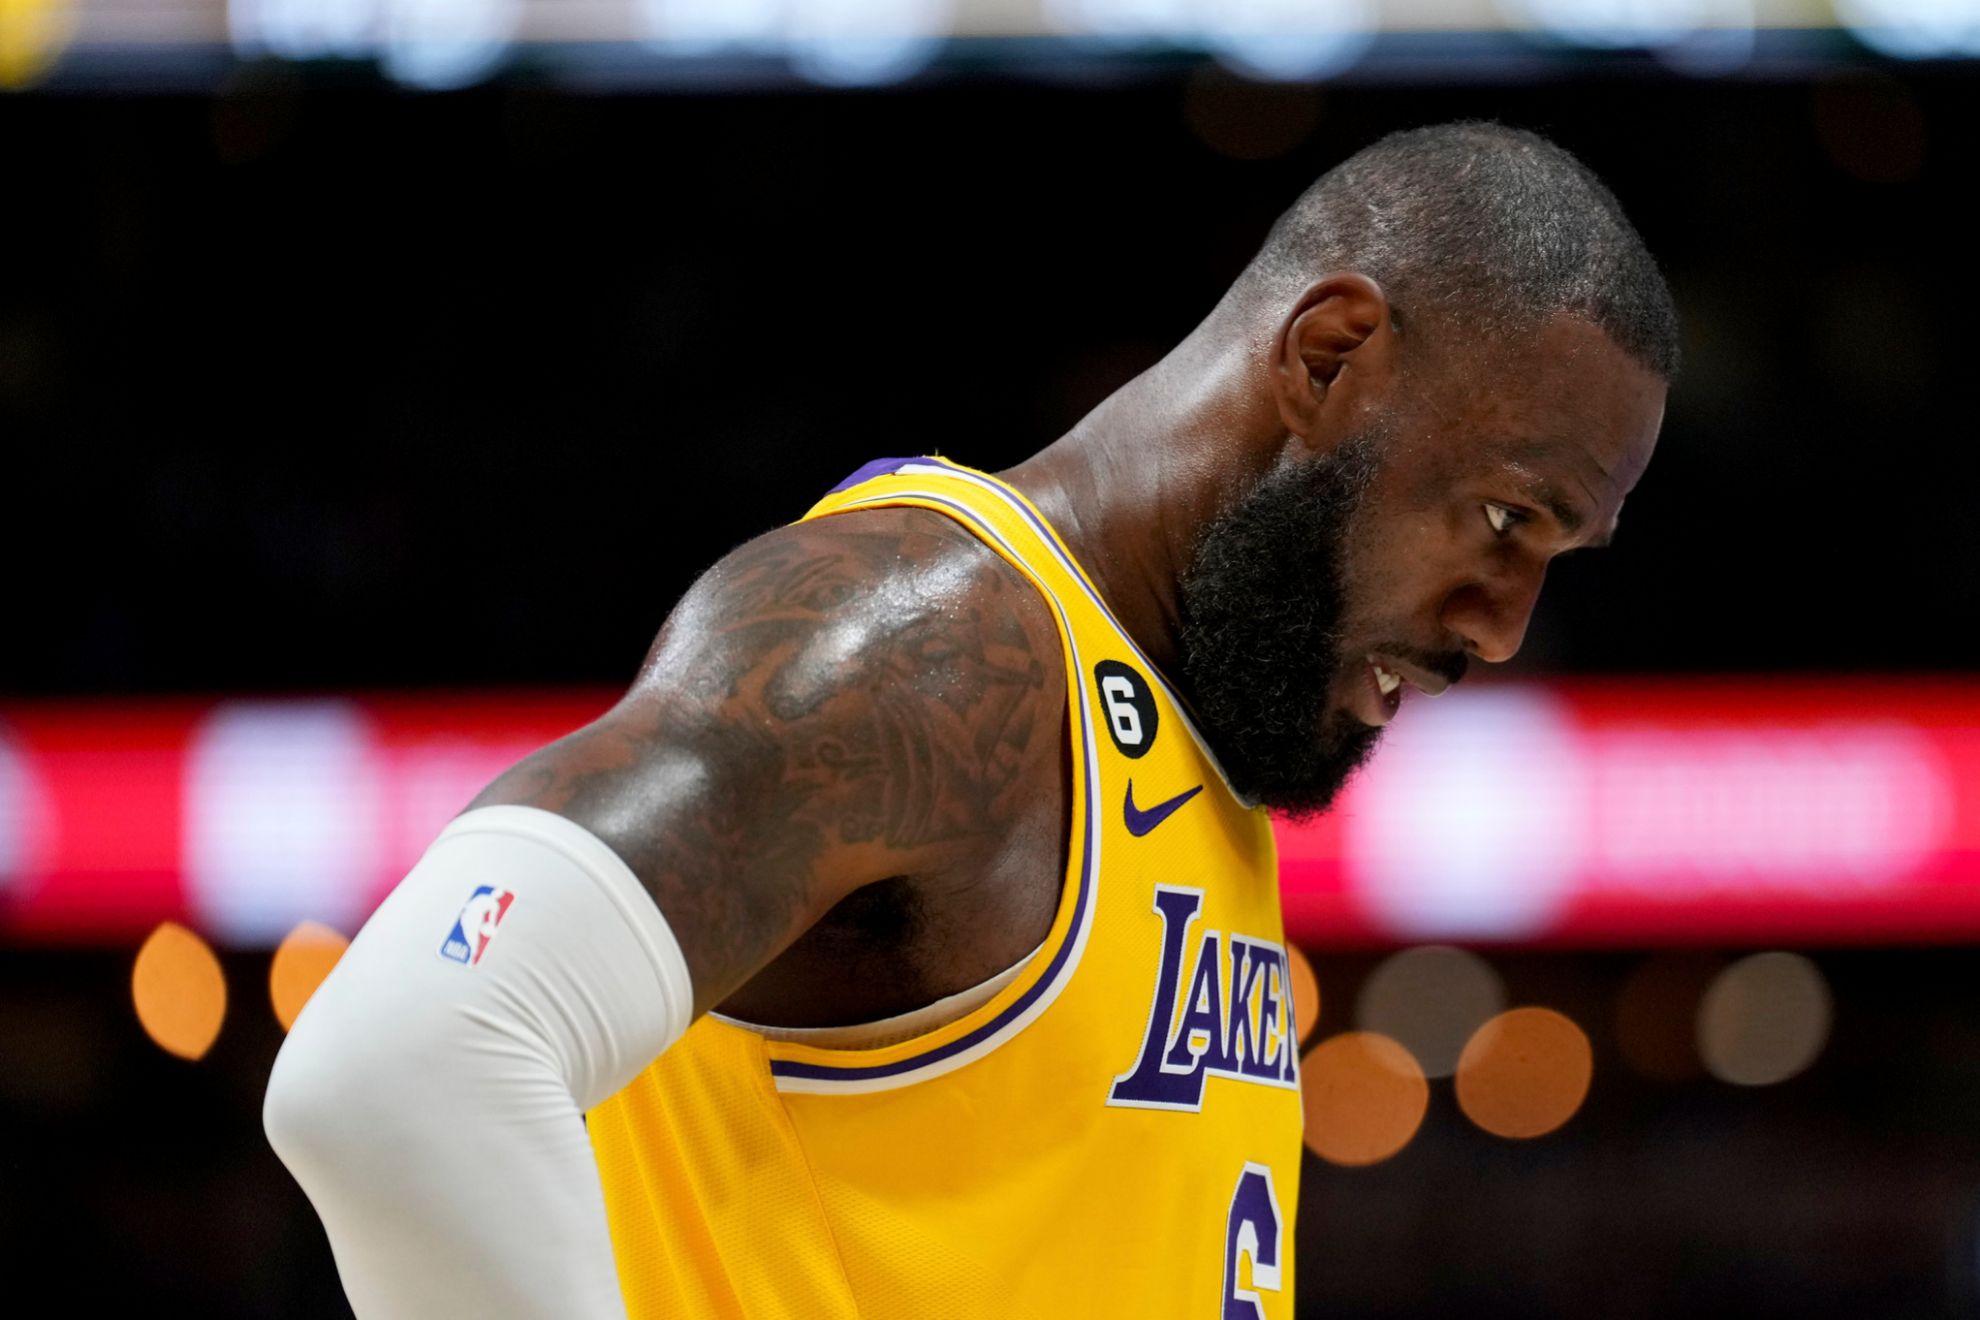 Skip Bayless labels LeBron James all-time pathetic after Lakers